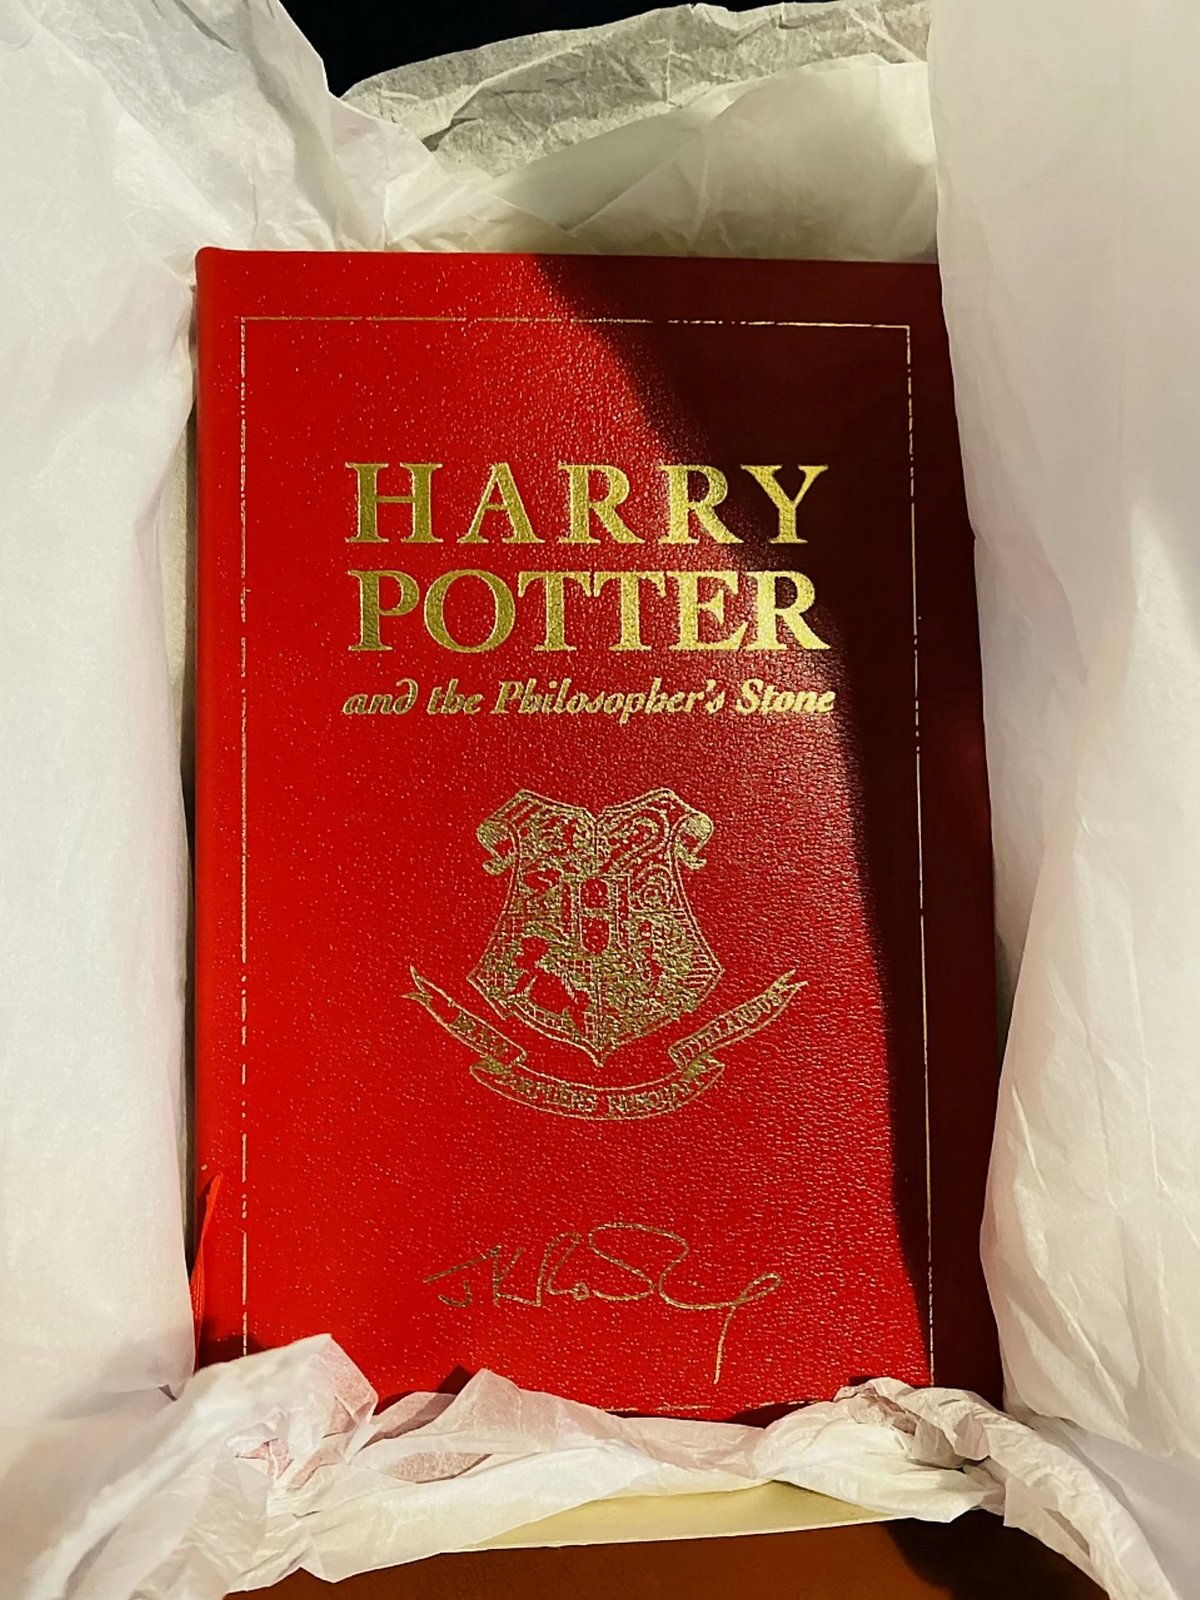 Harry Potter' First Edition Sells at Auction for $69,000